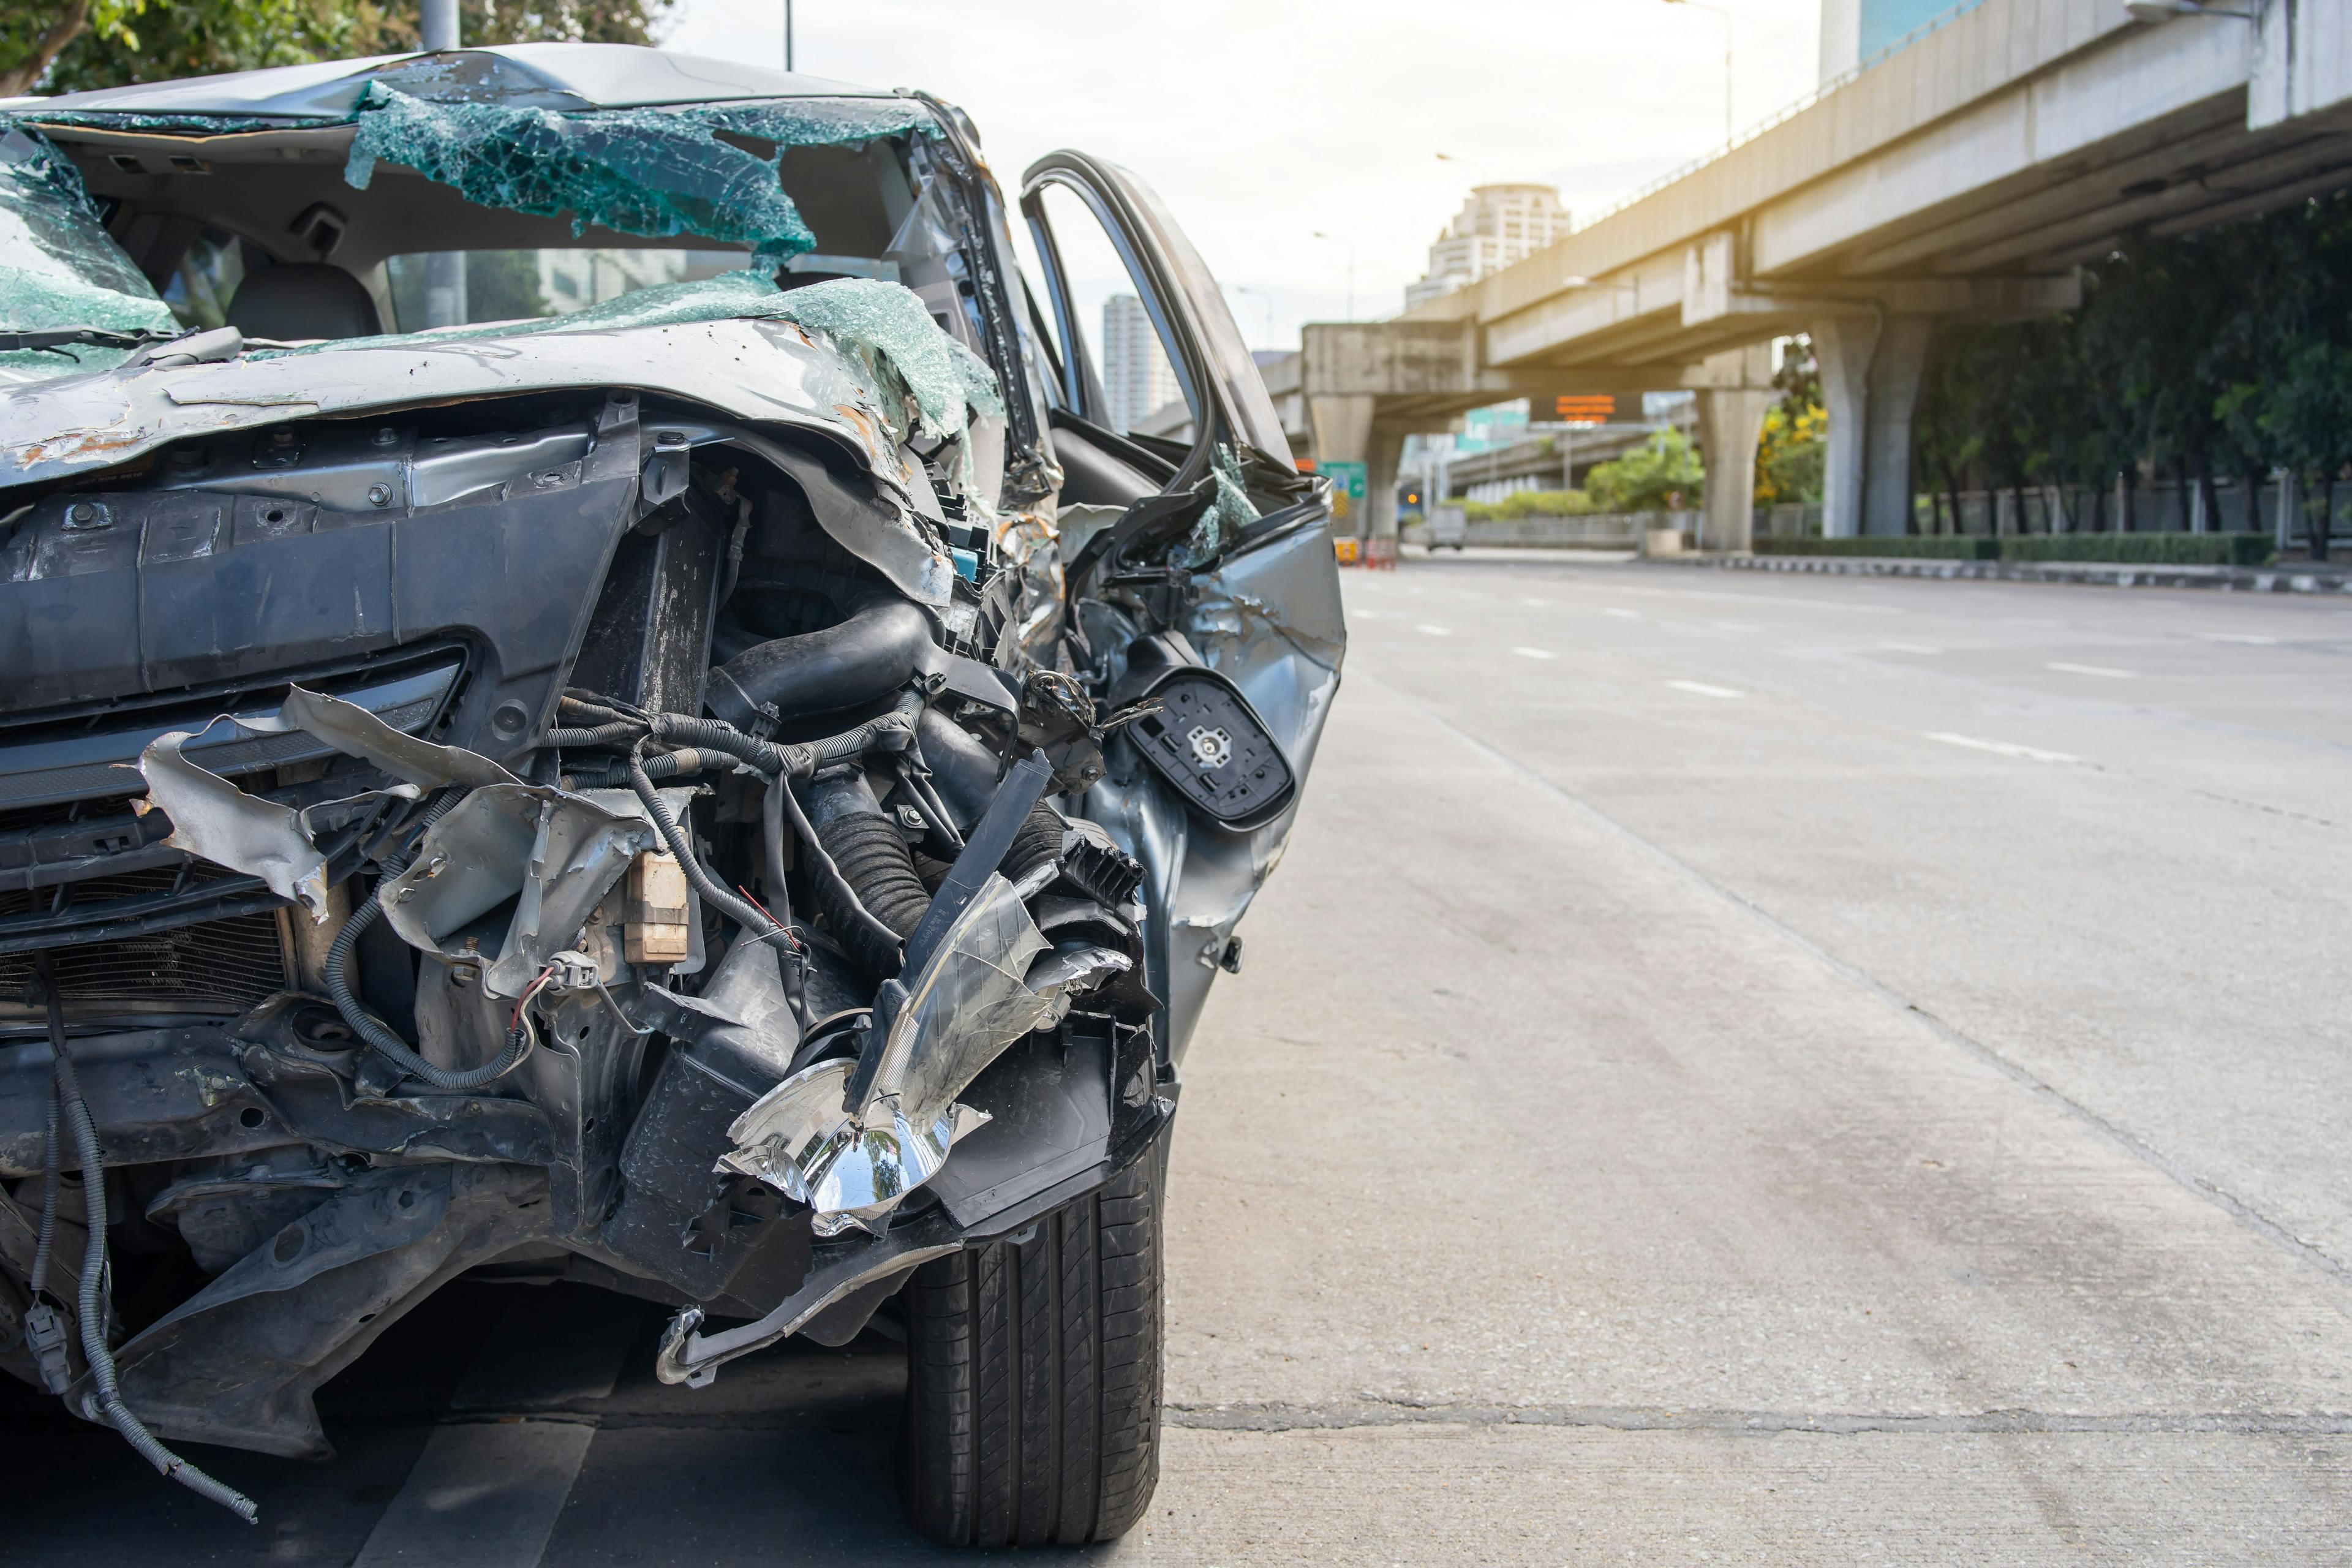 Image related to Comprehensive Legal Support for Car Accident Victims in LA